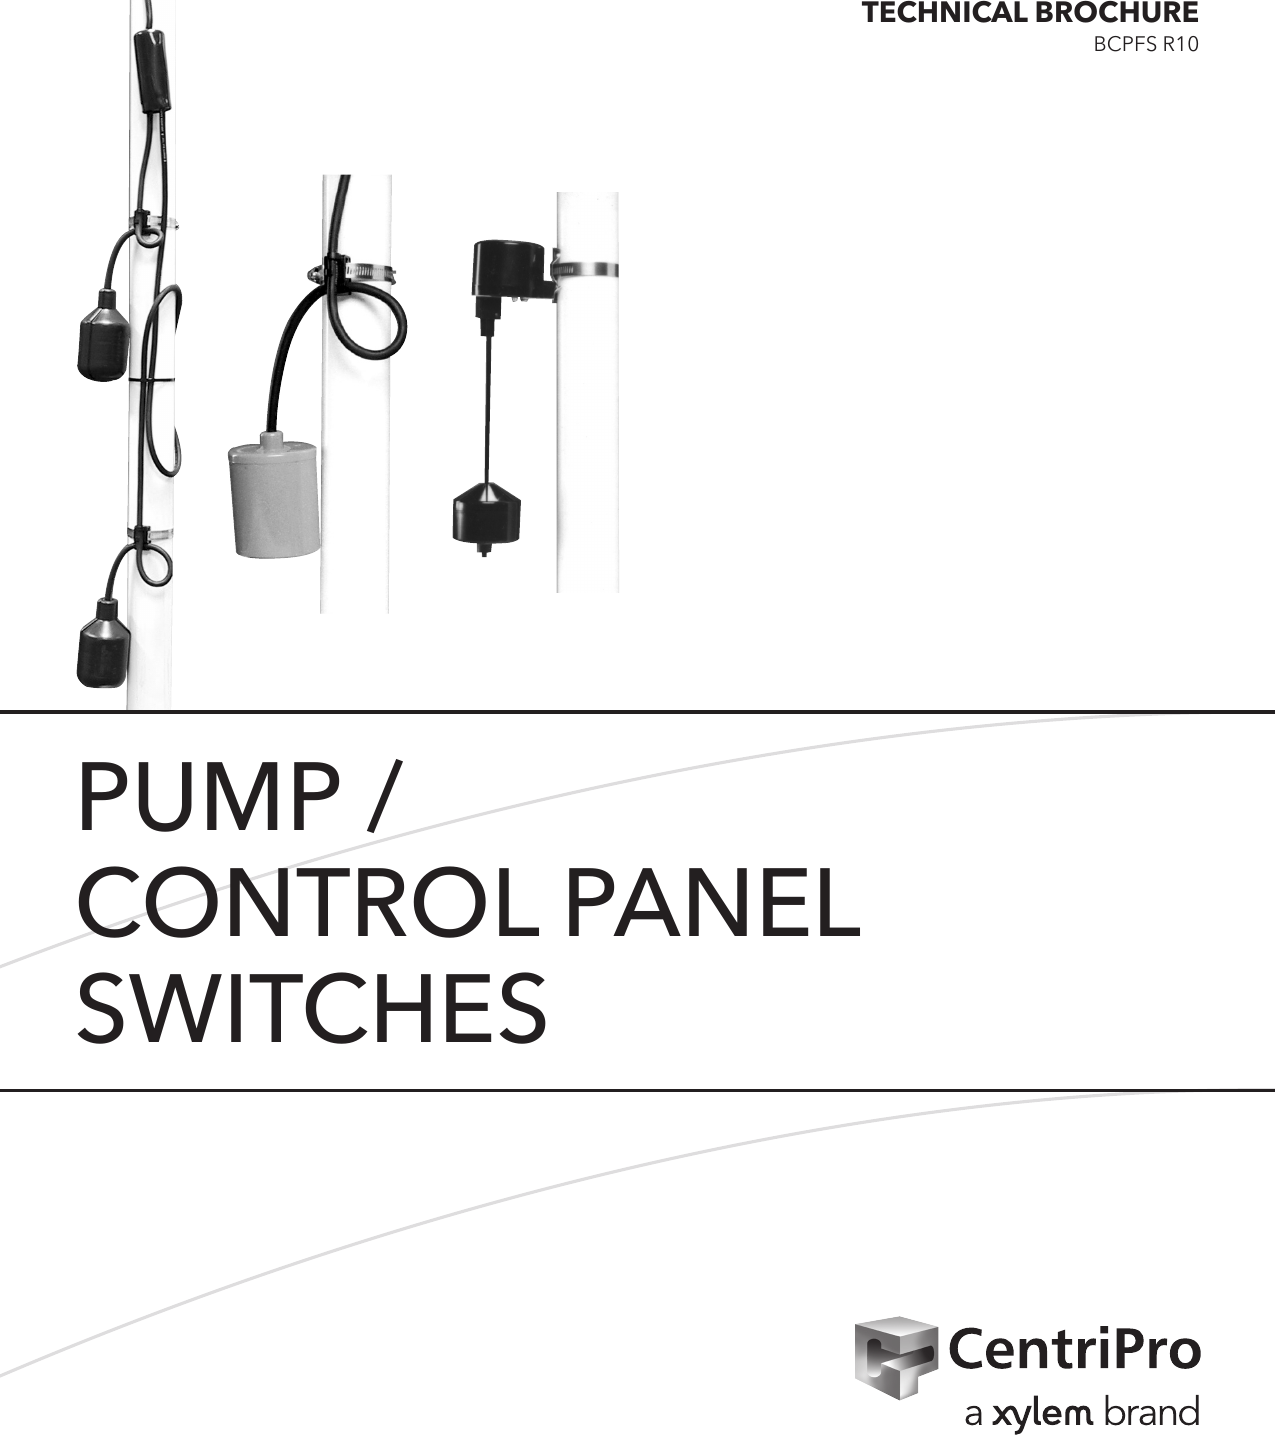 Page 1 of 8 - 542331 1 Centripro Pump & Control Panel Switches Technical Brochure